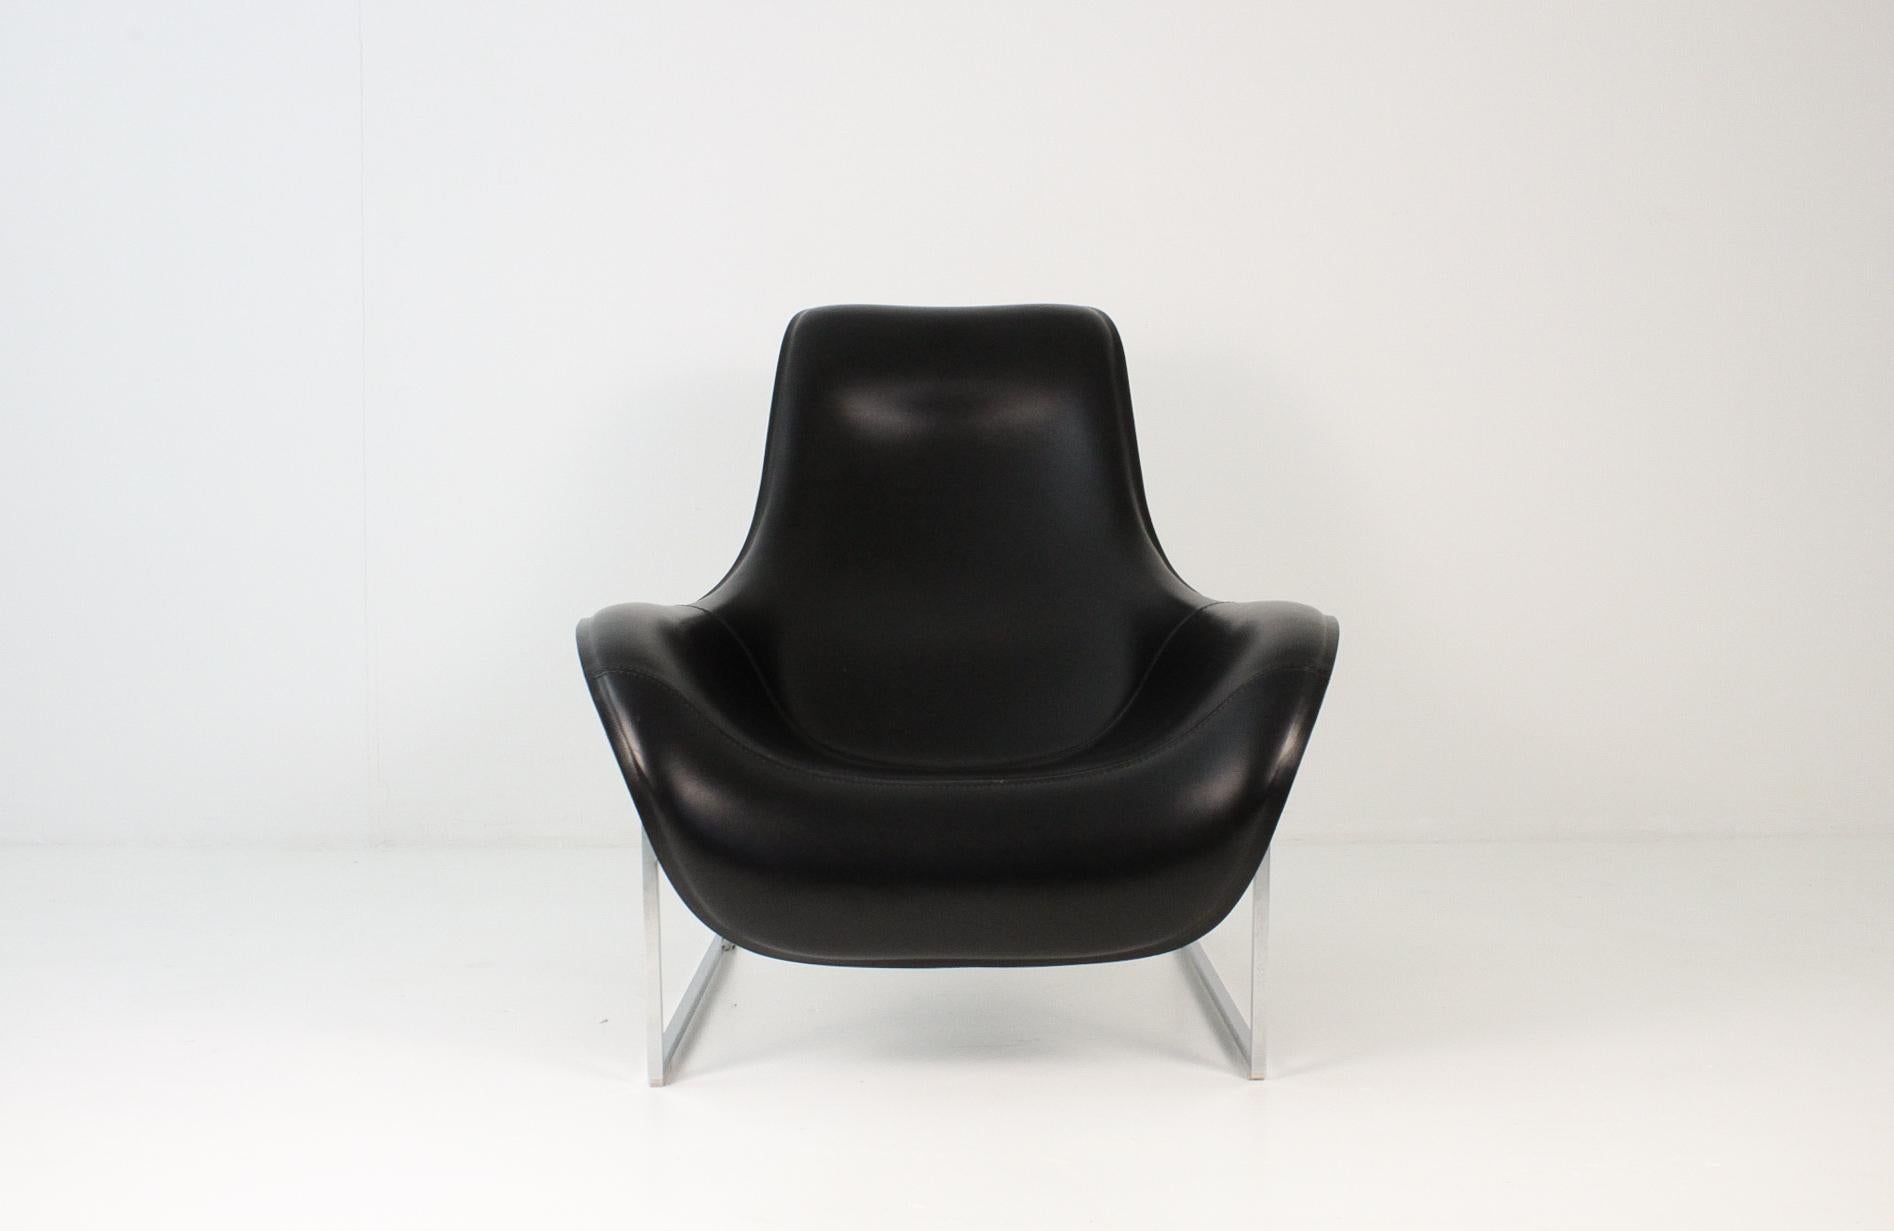 Mart lounge chair designed by Antonio Citterio for B&B Italia. Mart features a leather silhouette shape which is used to convey the idea of relaxation with its adjustable seat position.The sleek, hollow shape is crafted from fibre glass and it is